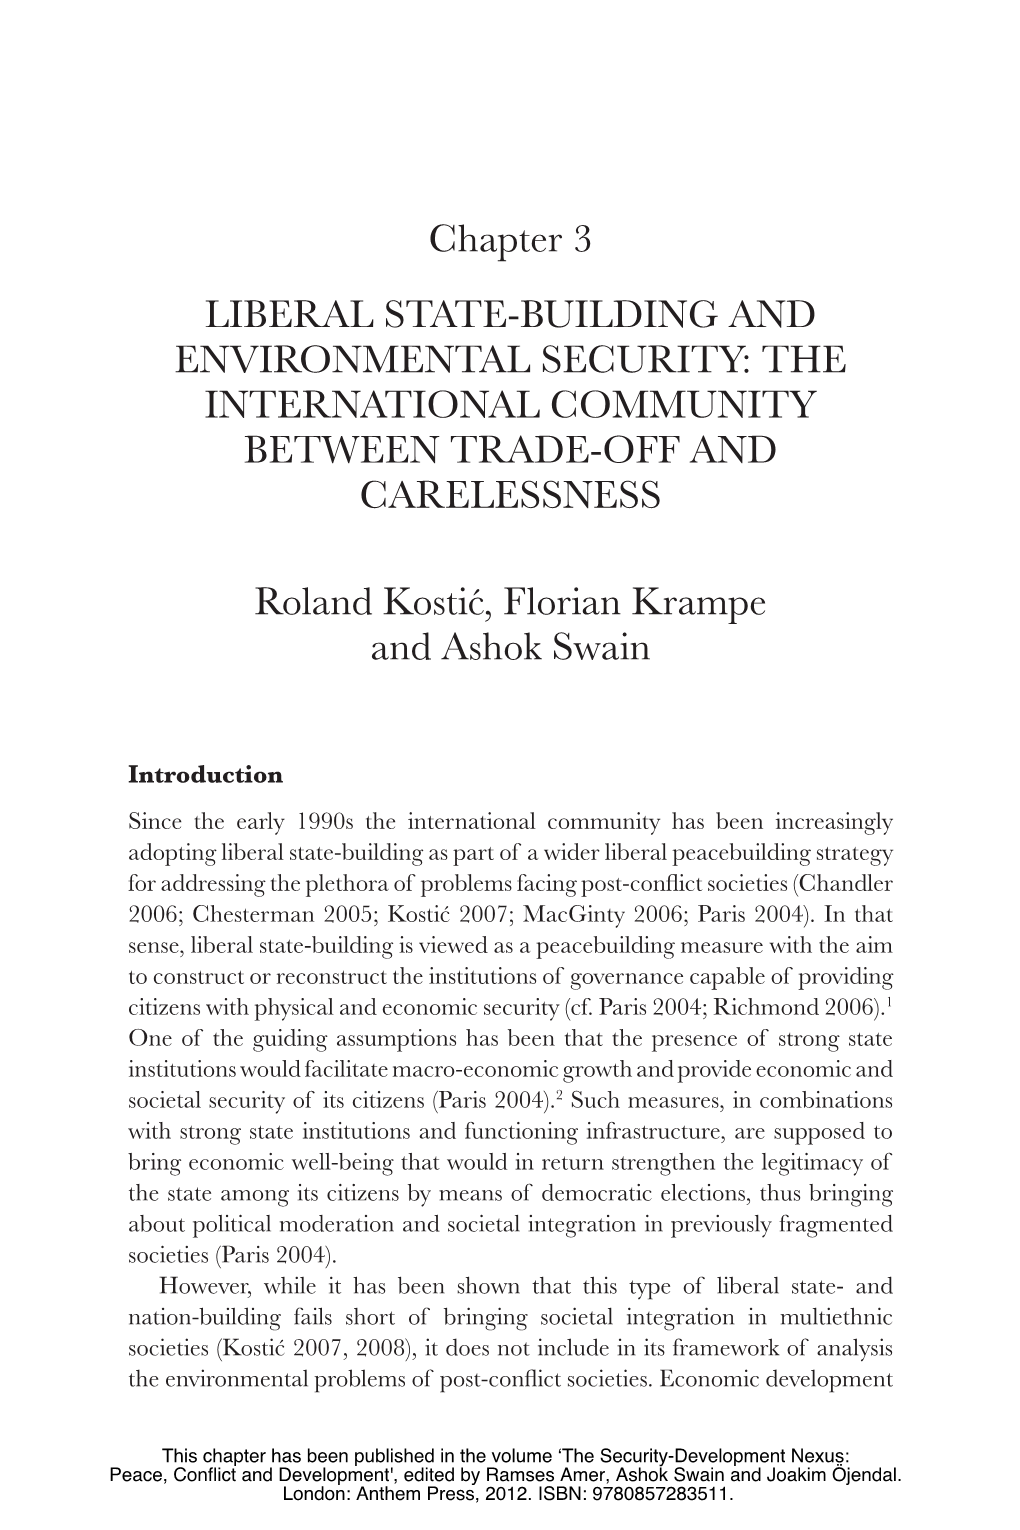 Chapter 3 LIBERAL STATE-BUILDING and ENVIRONMENTAL SECURITY: the INTERNATIONAL COMMUNITY BETWEEN TRADE-OFF and CARELESSNESS